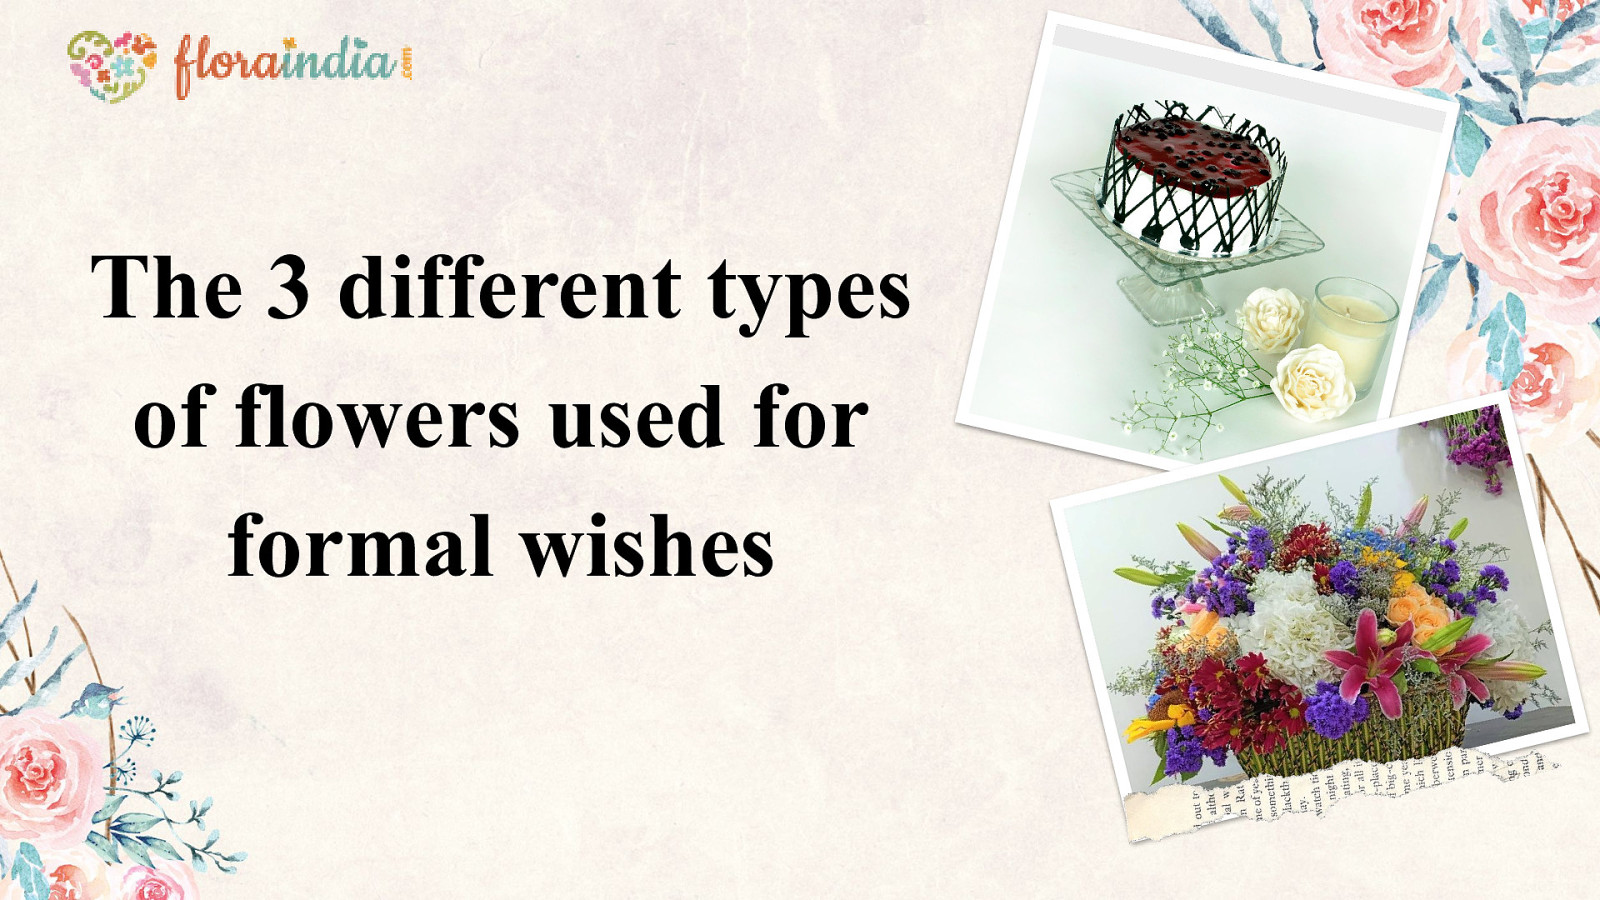 The 3 different types of flowers used for formal wishes